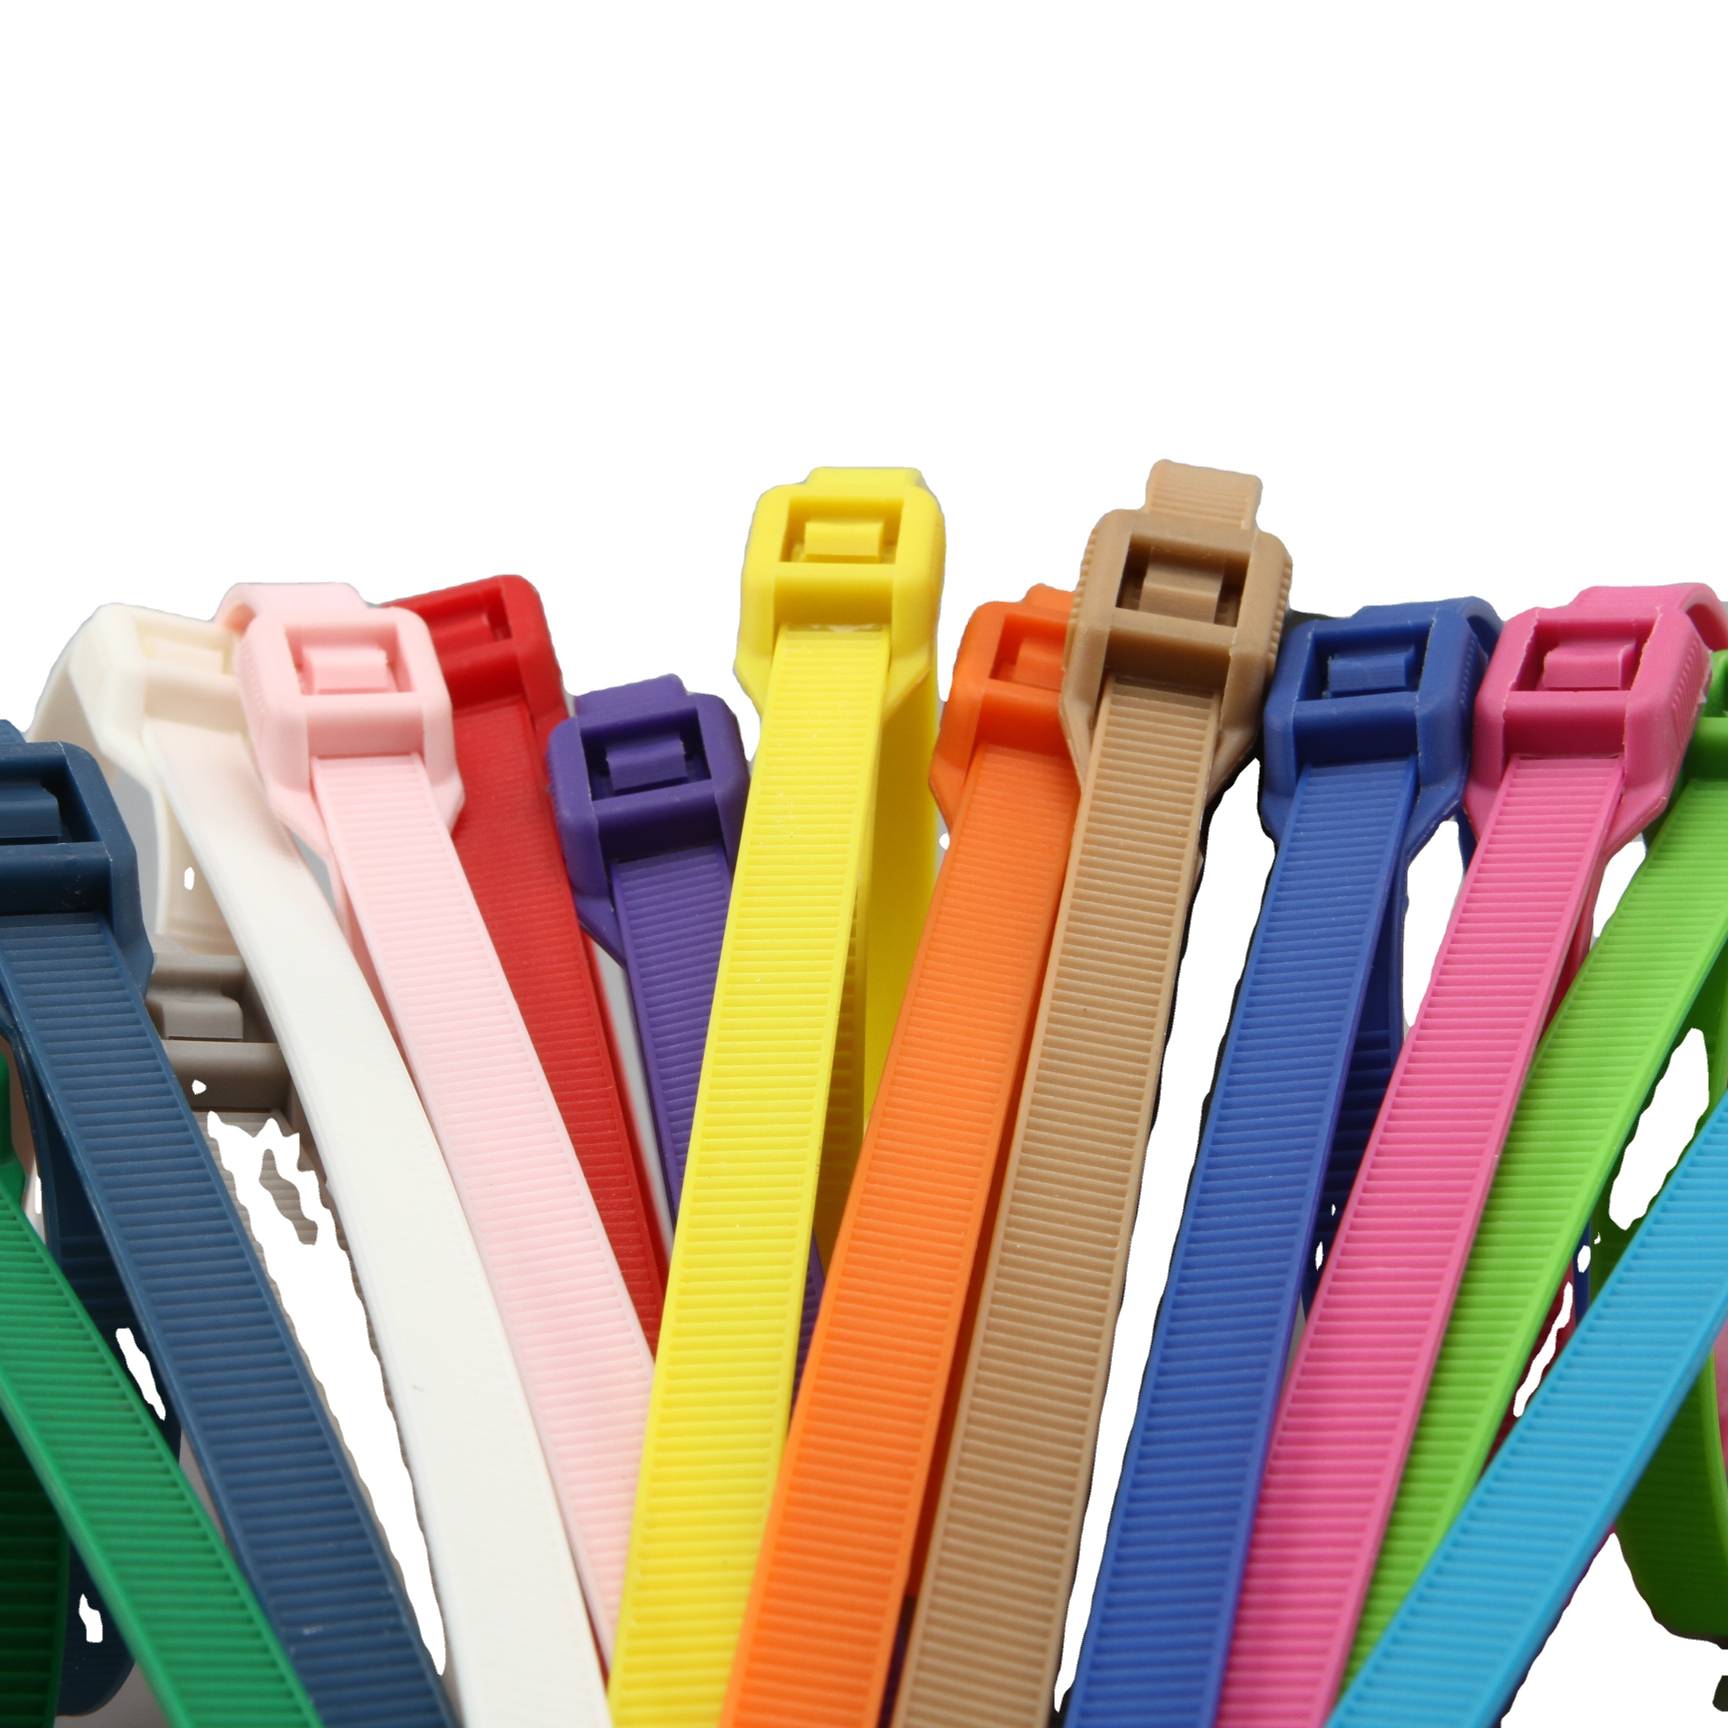 Anti disassembly (lead sealed) nylon cable tie - 4 